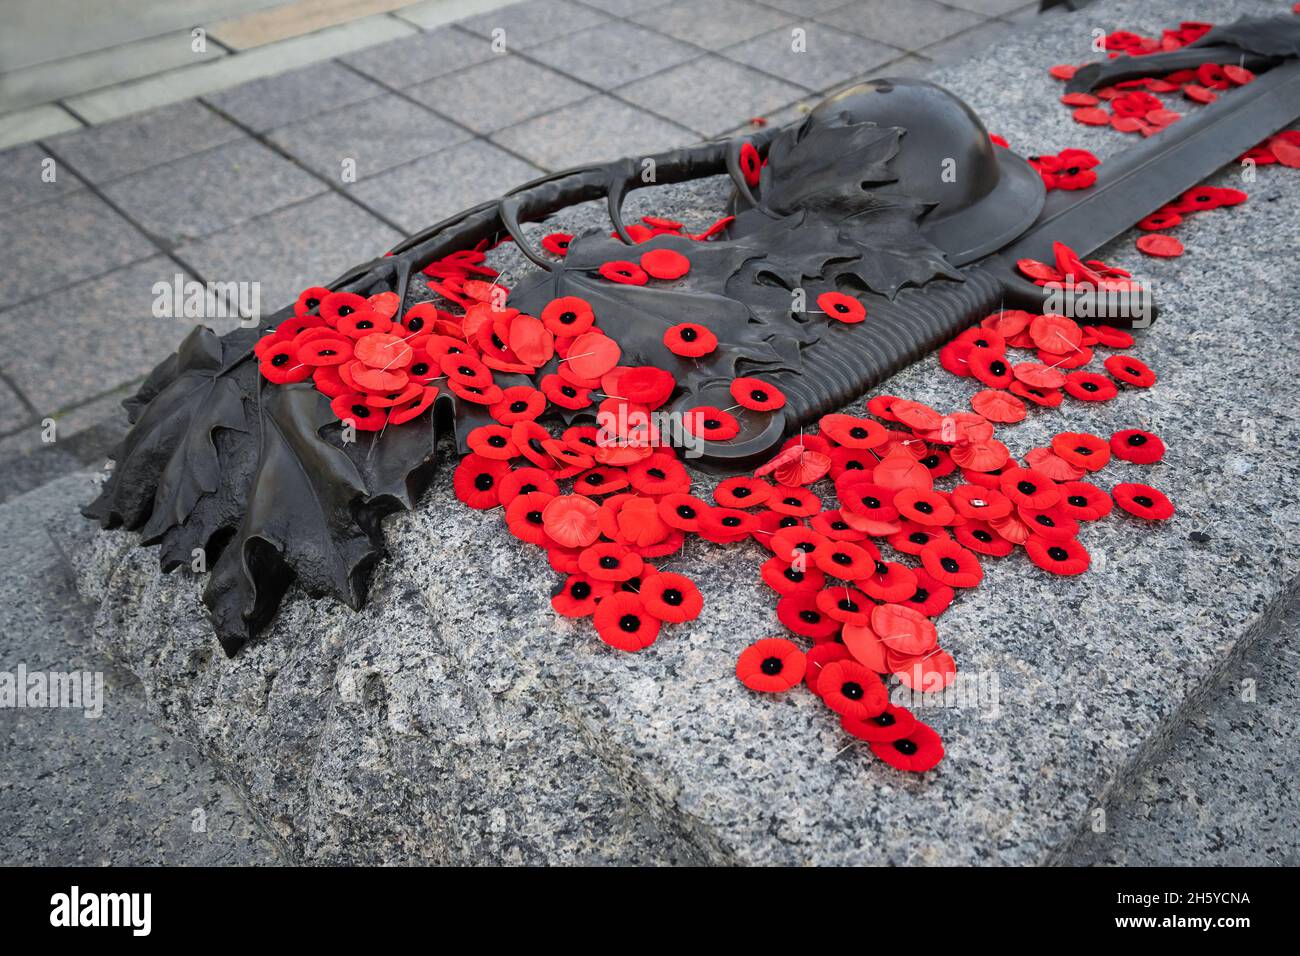 Poppies placed on the Tomb of the Unknown Soldier following the Remembrance Day ceremony in Ottawa, Canada Stock Photo